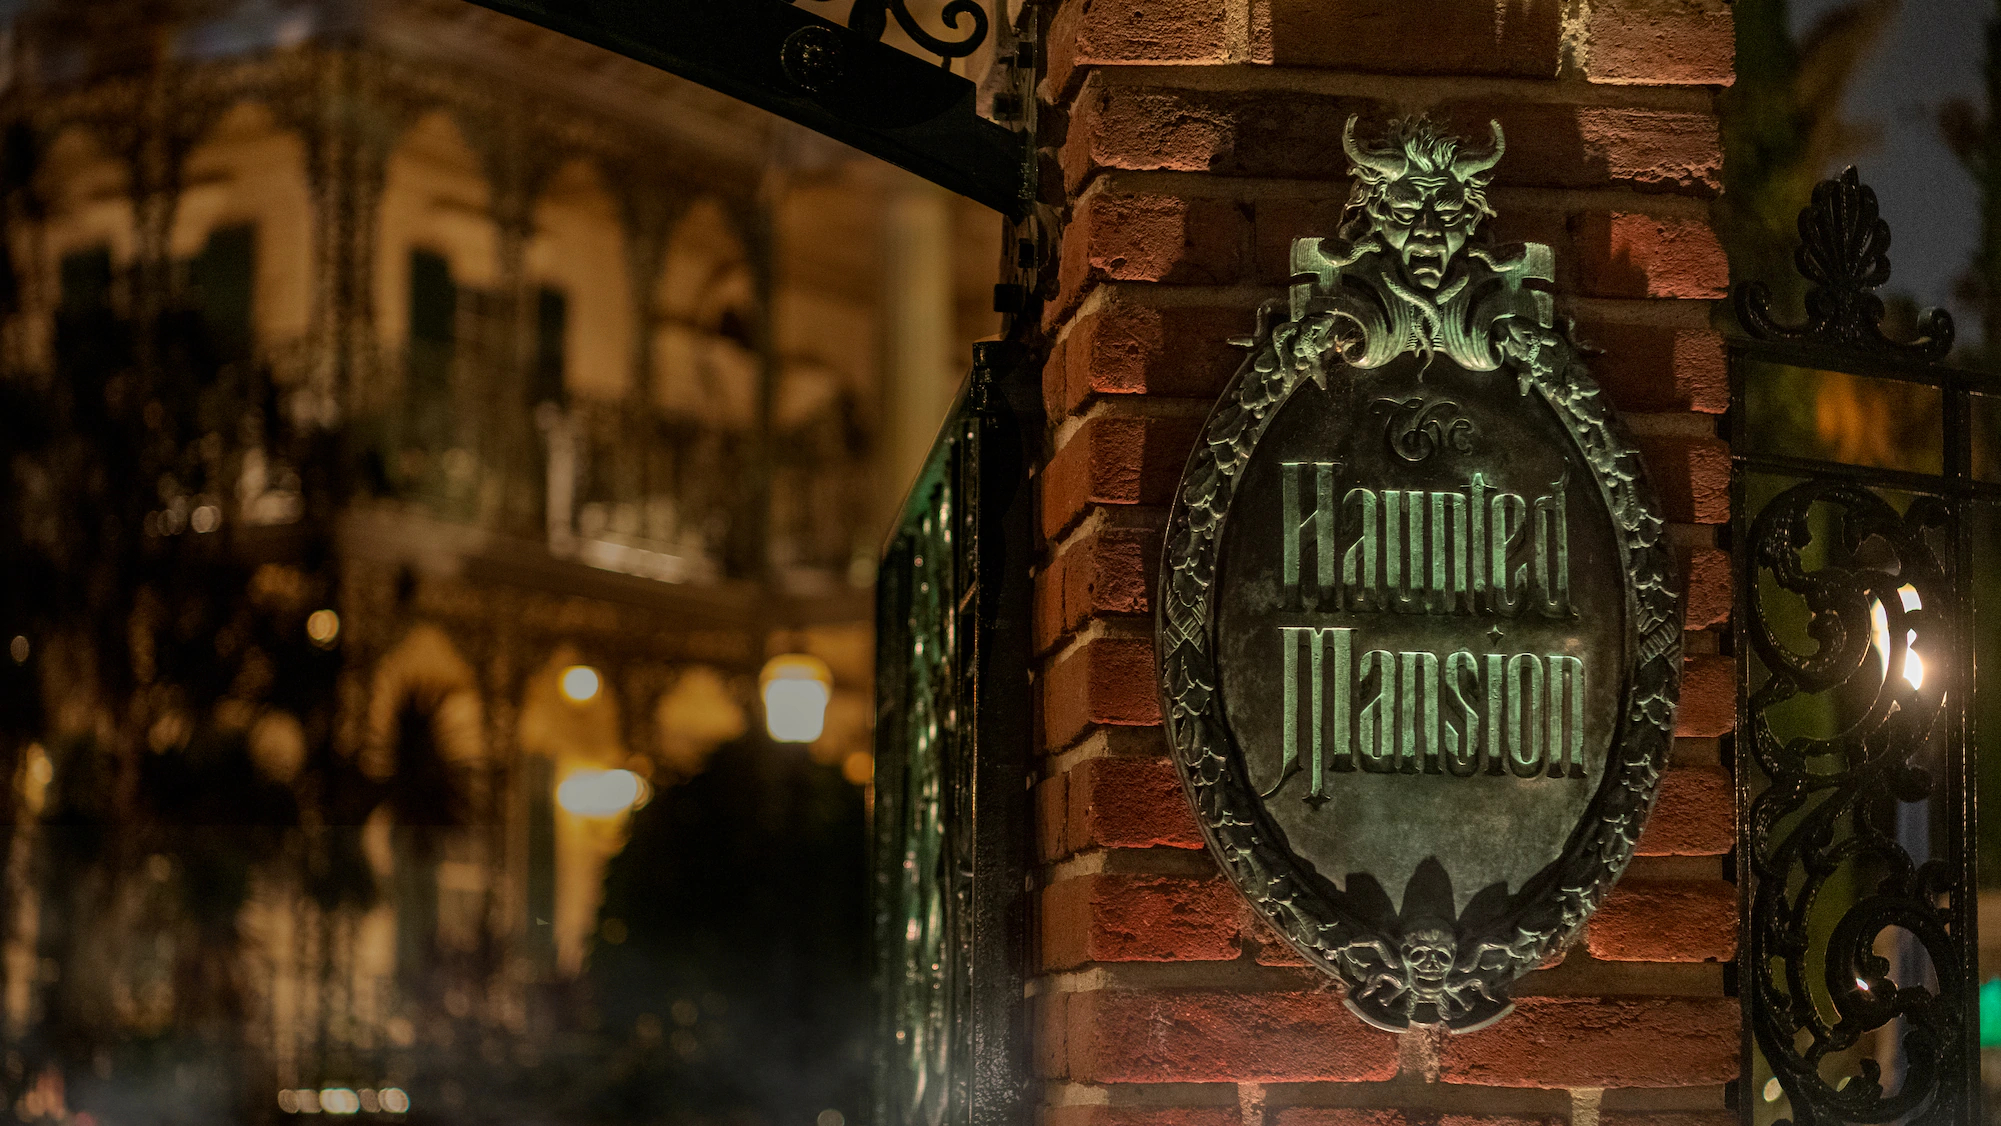 https://bloody-disgusting.com/wp-content/uploads/2020/09/haunted-mansion-plaque-16x9-1.jpg